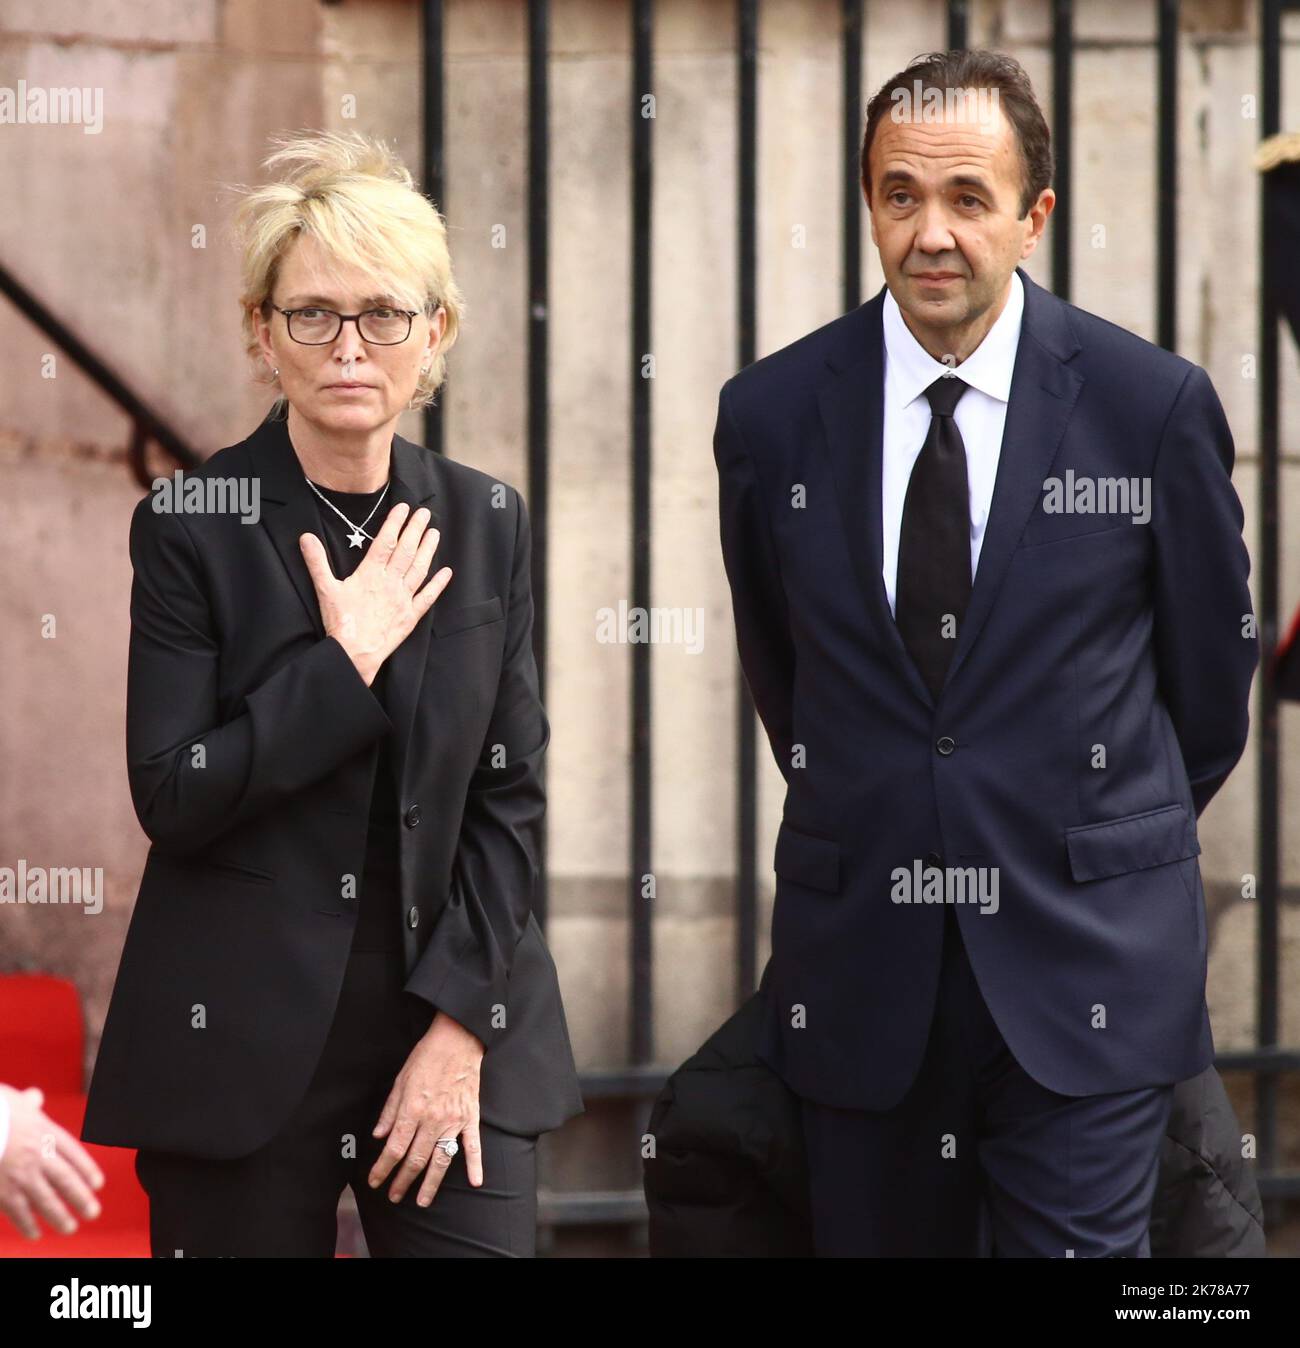 Former French president Jacques Chirac Funeral at the Eglise Saint-Sulpice (St Sulpitius' Church) in Paris, France on September 30, 2019,   Pictured: Claude Chirac, daughter of Jacques Chirac and her husand. Â© Pierre Teyssot / Maxppp Stock Photo